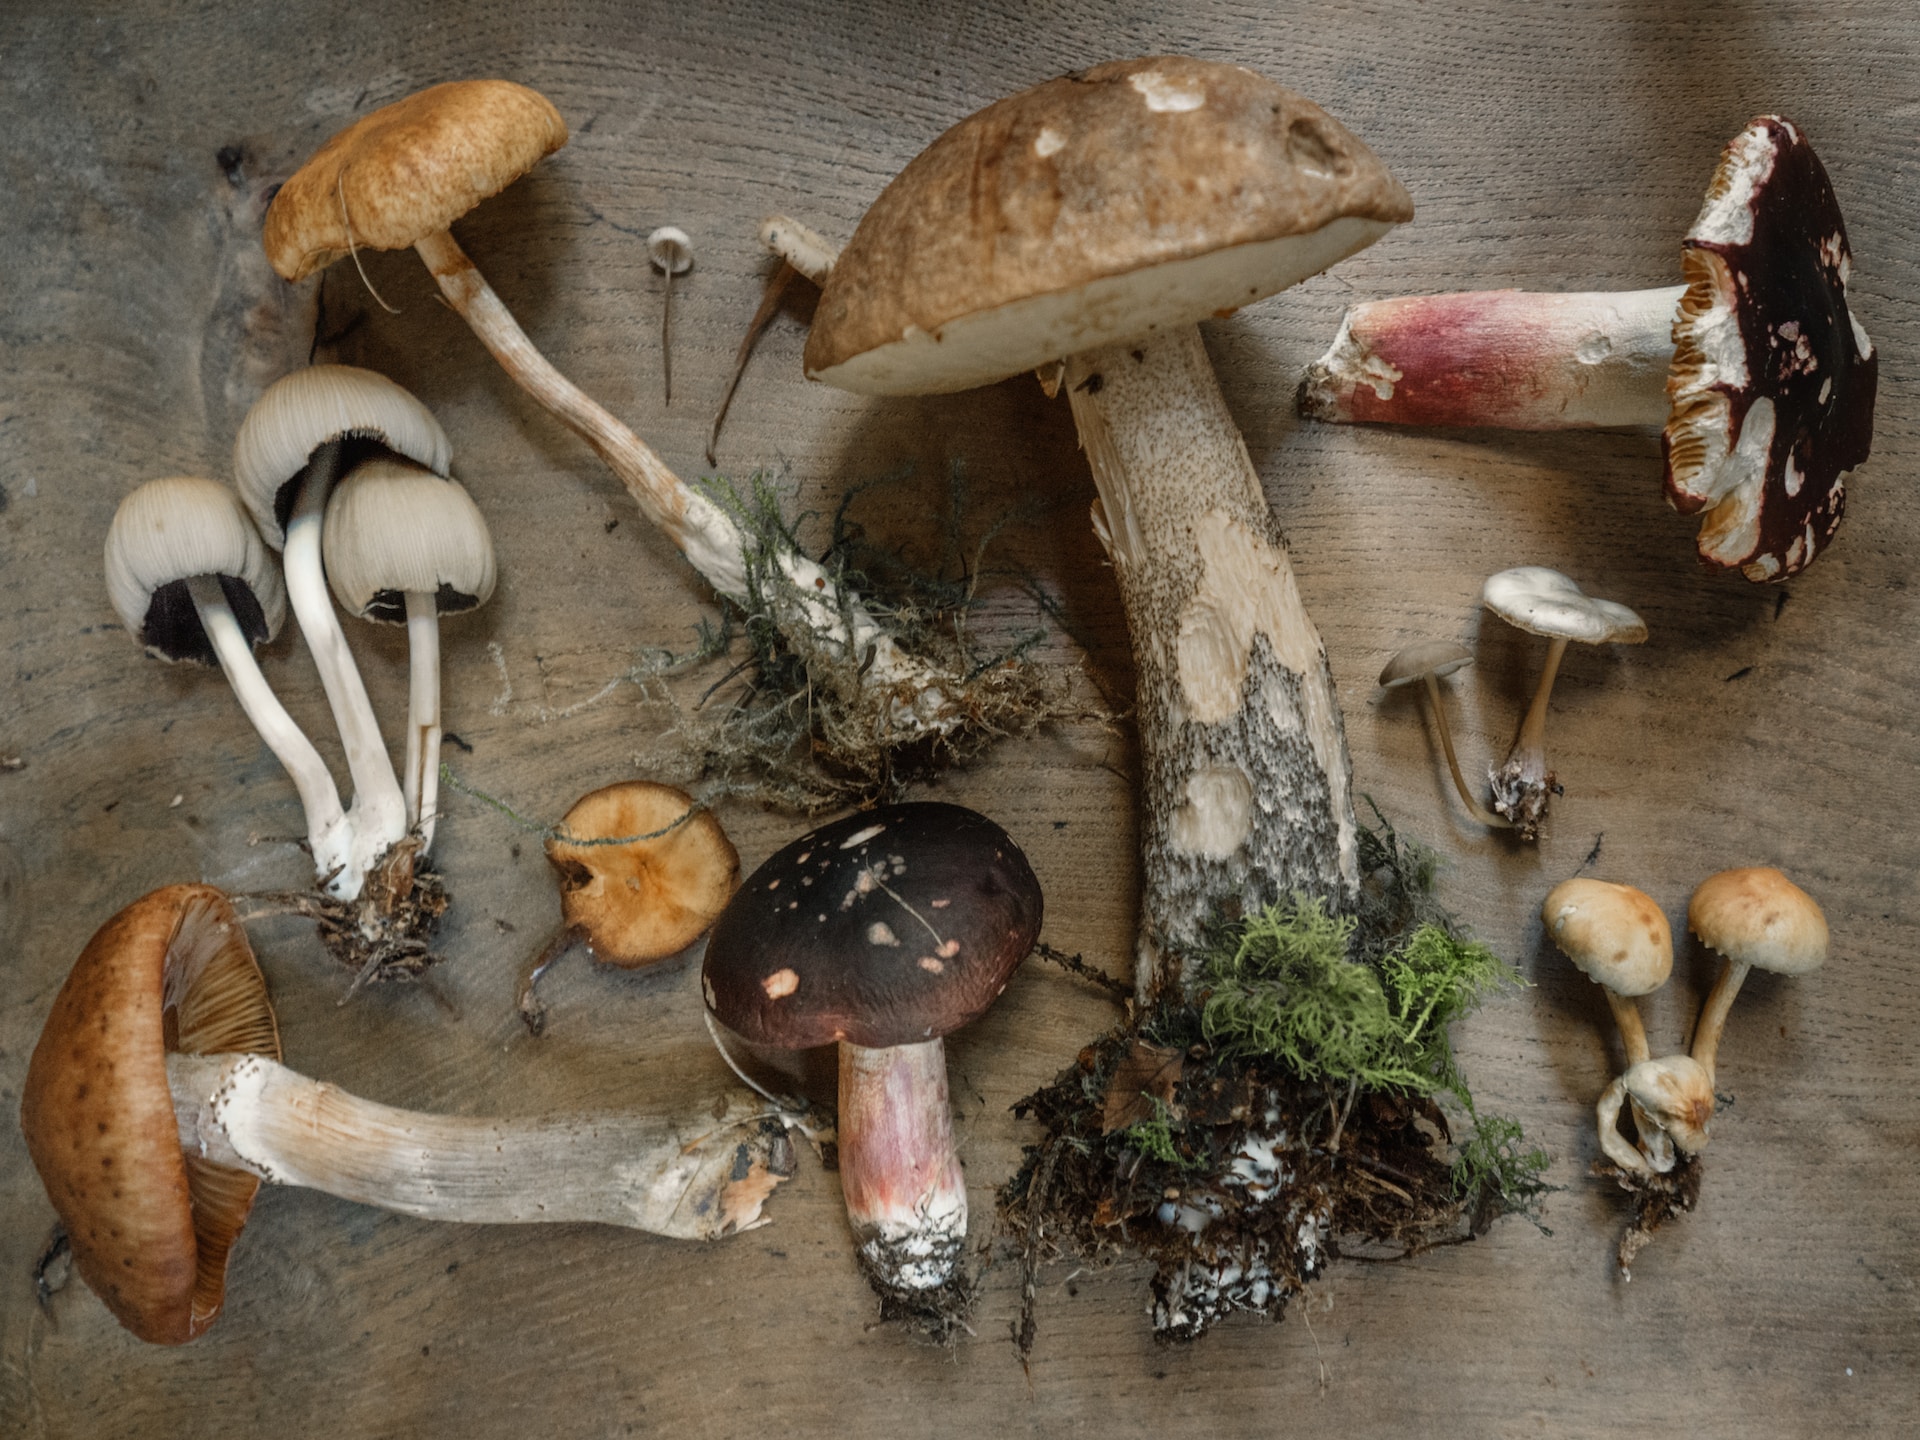 A Beginner’s Guide to Mushroom Foraging